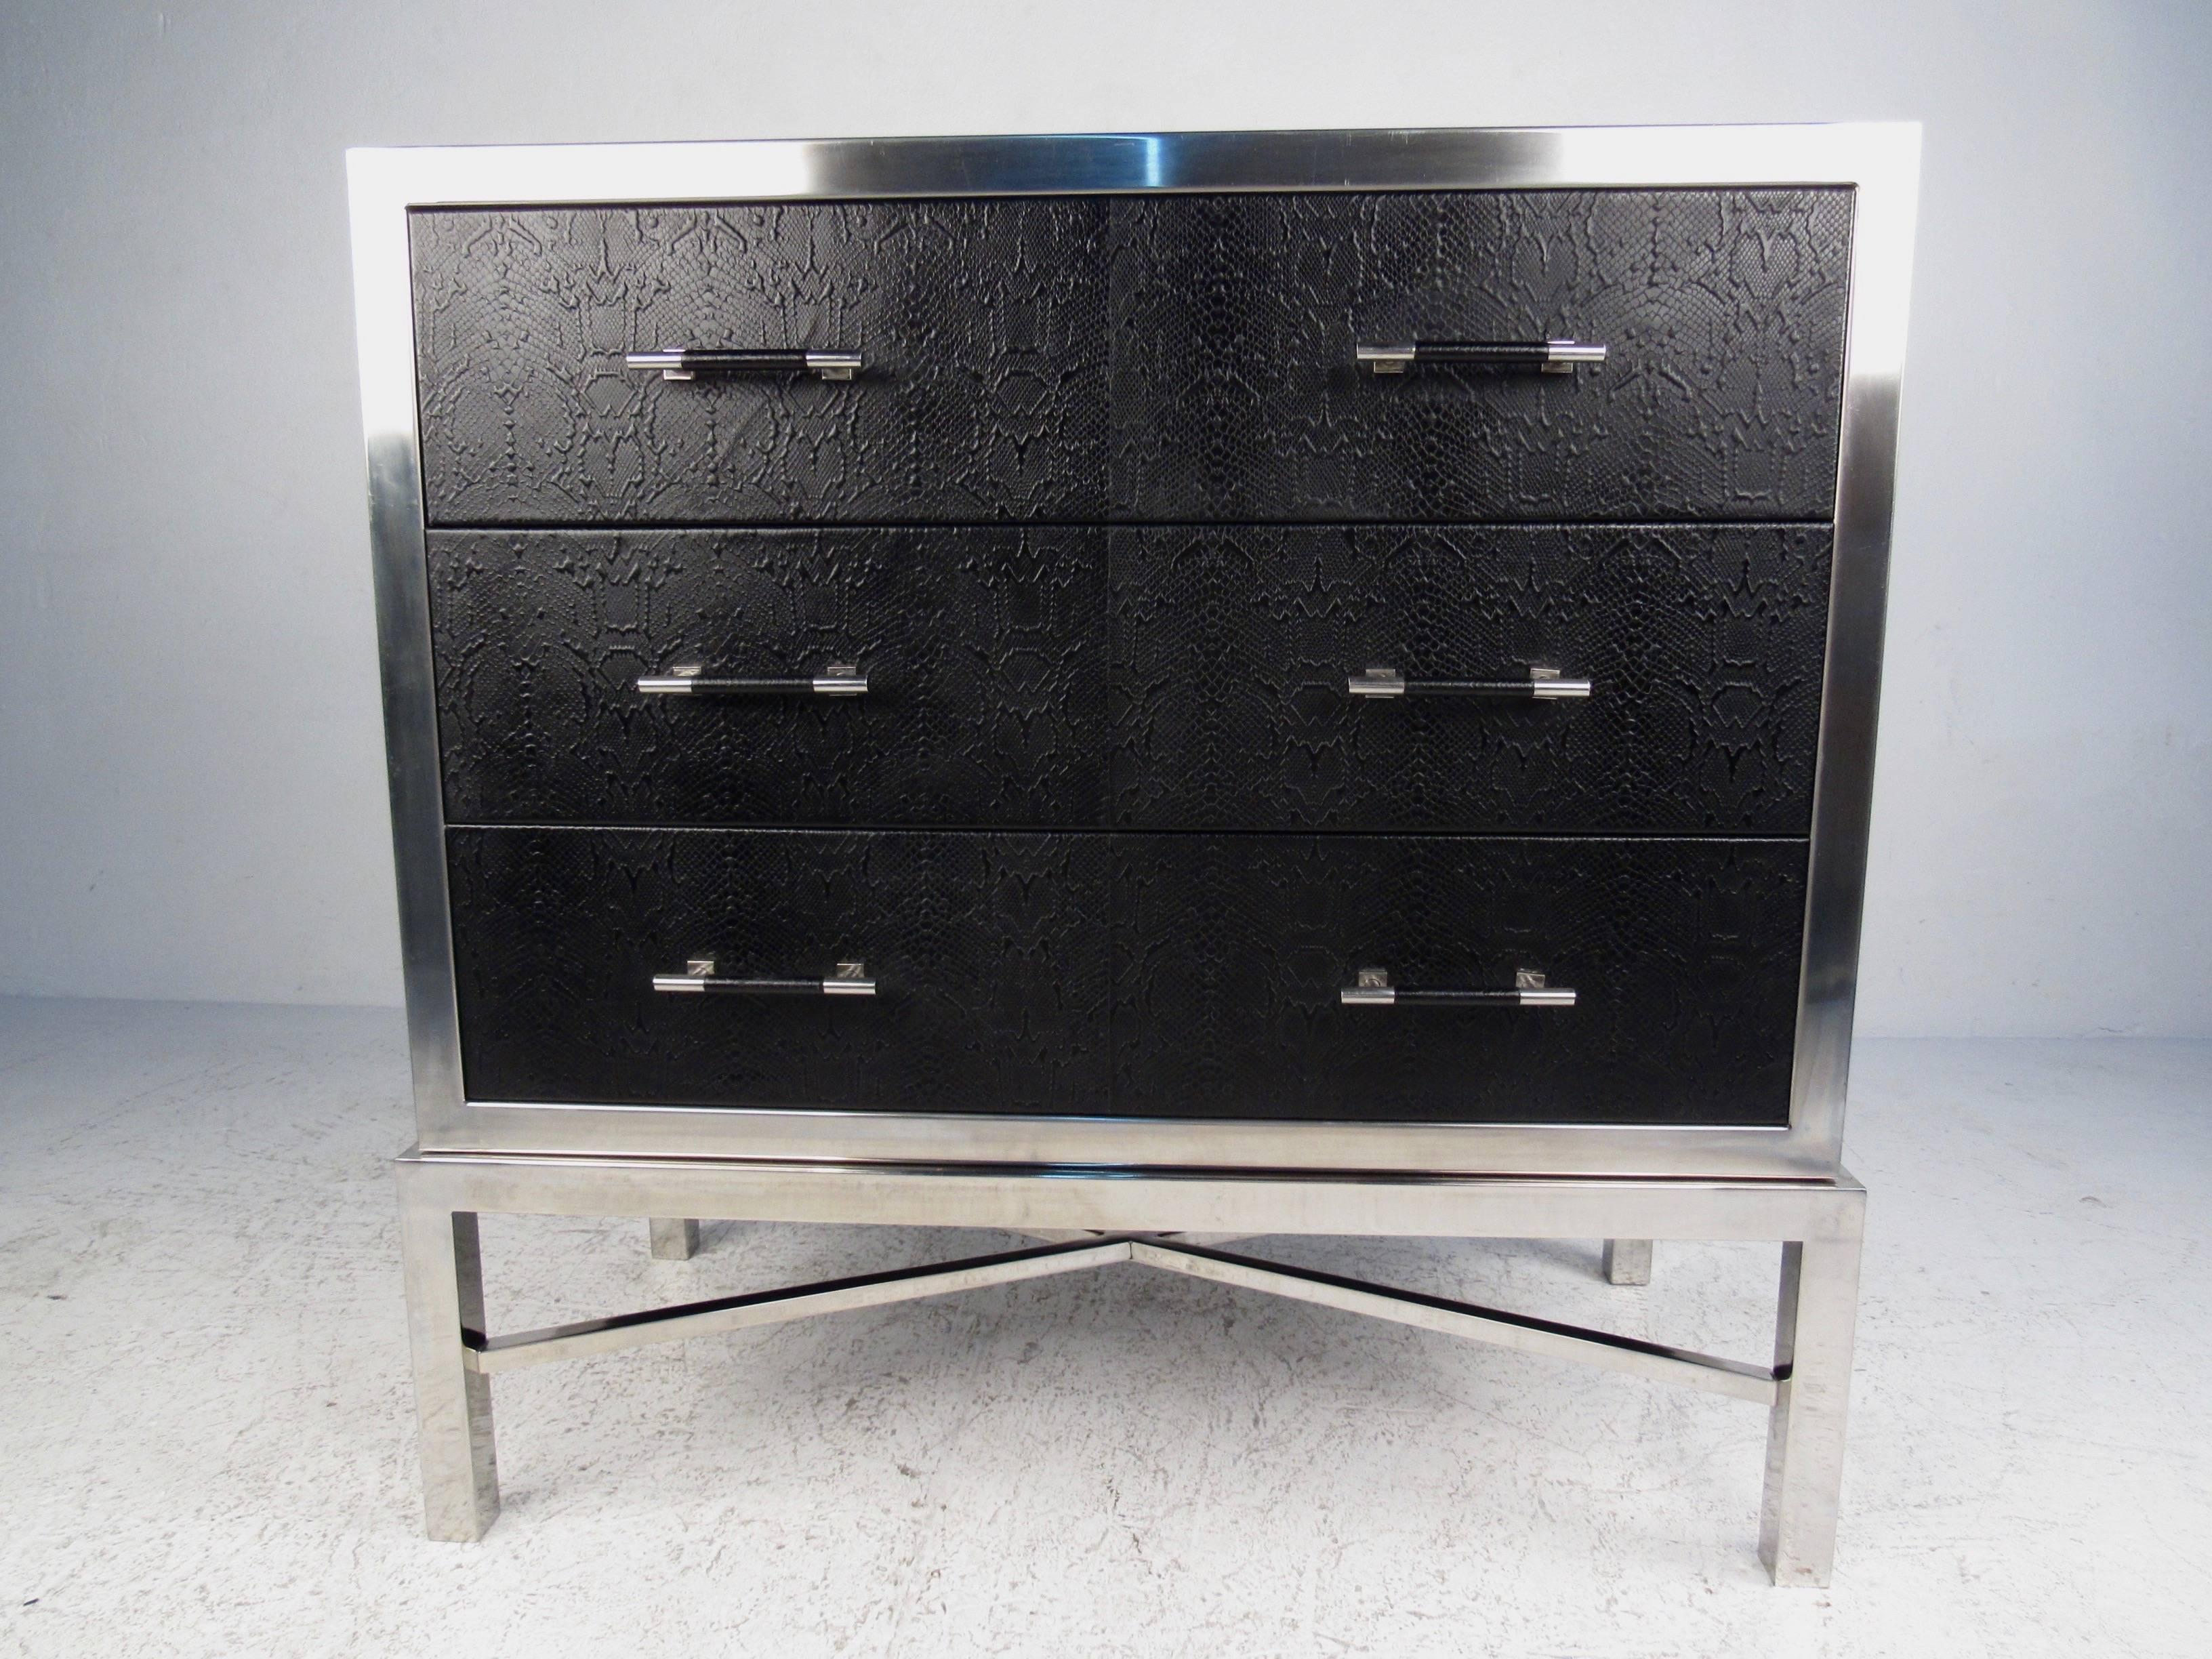 This impressive contemporary modern chest of drawers features a heavy chrome frame with faux snakeskin finish. Fabric lined drawers, X style stretchers, and unique pulls make this spacious storage piece a practical and stylish addition to any